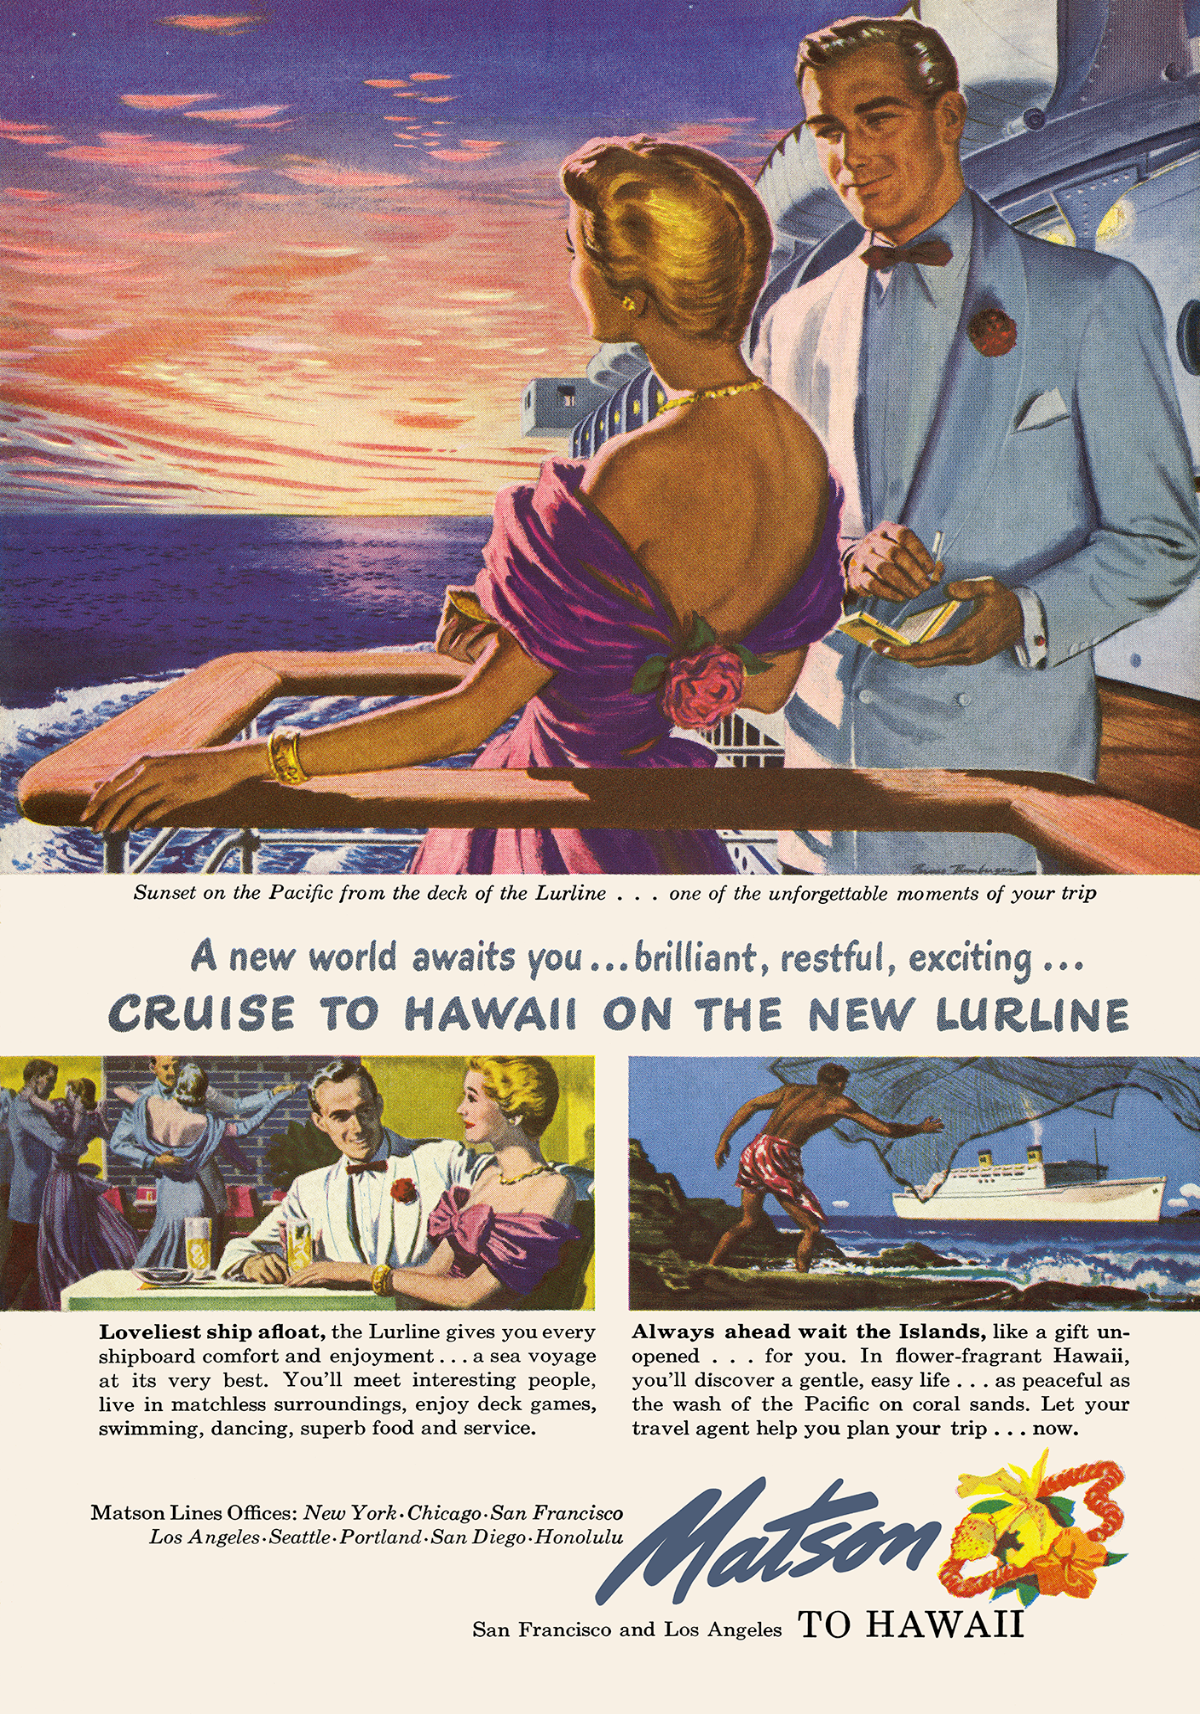 Matson cruise line travel ad to Hawaii featuring a man in white formal evening jacket and a woman in a formal purple dress enjoying the sunset on the Lurline ship deck.